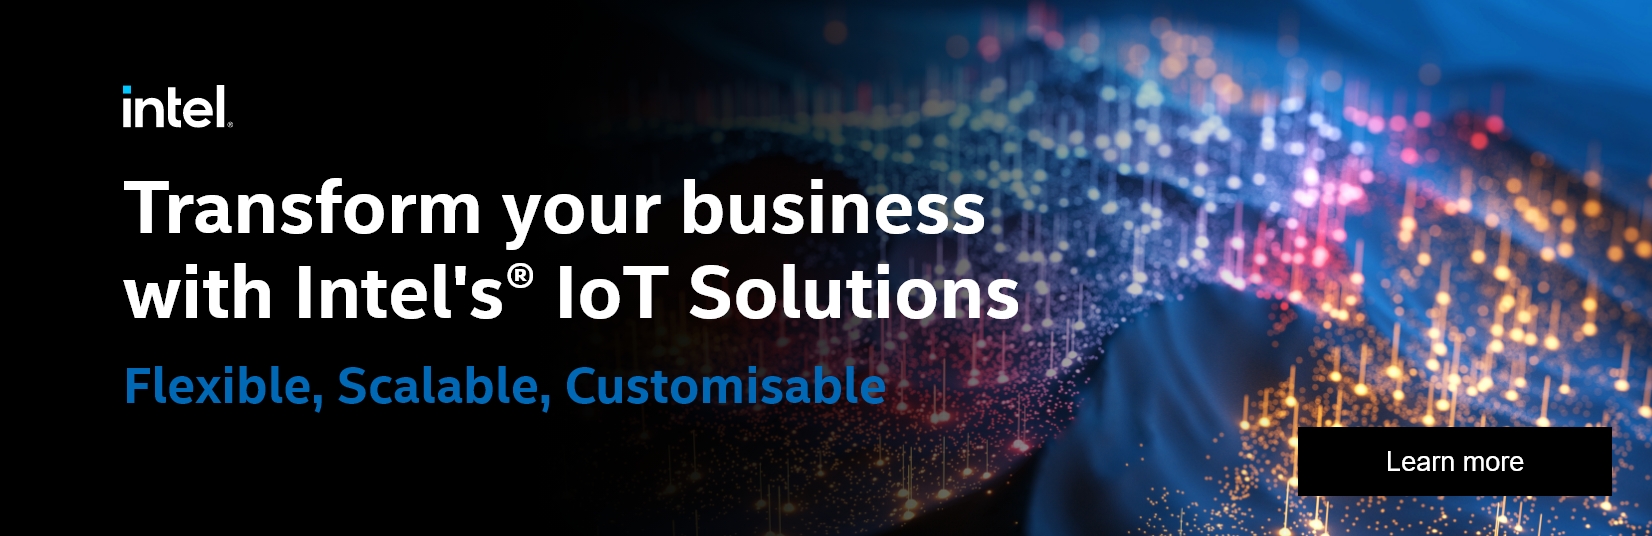 Transform your business with Intel's IoT Solutions